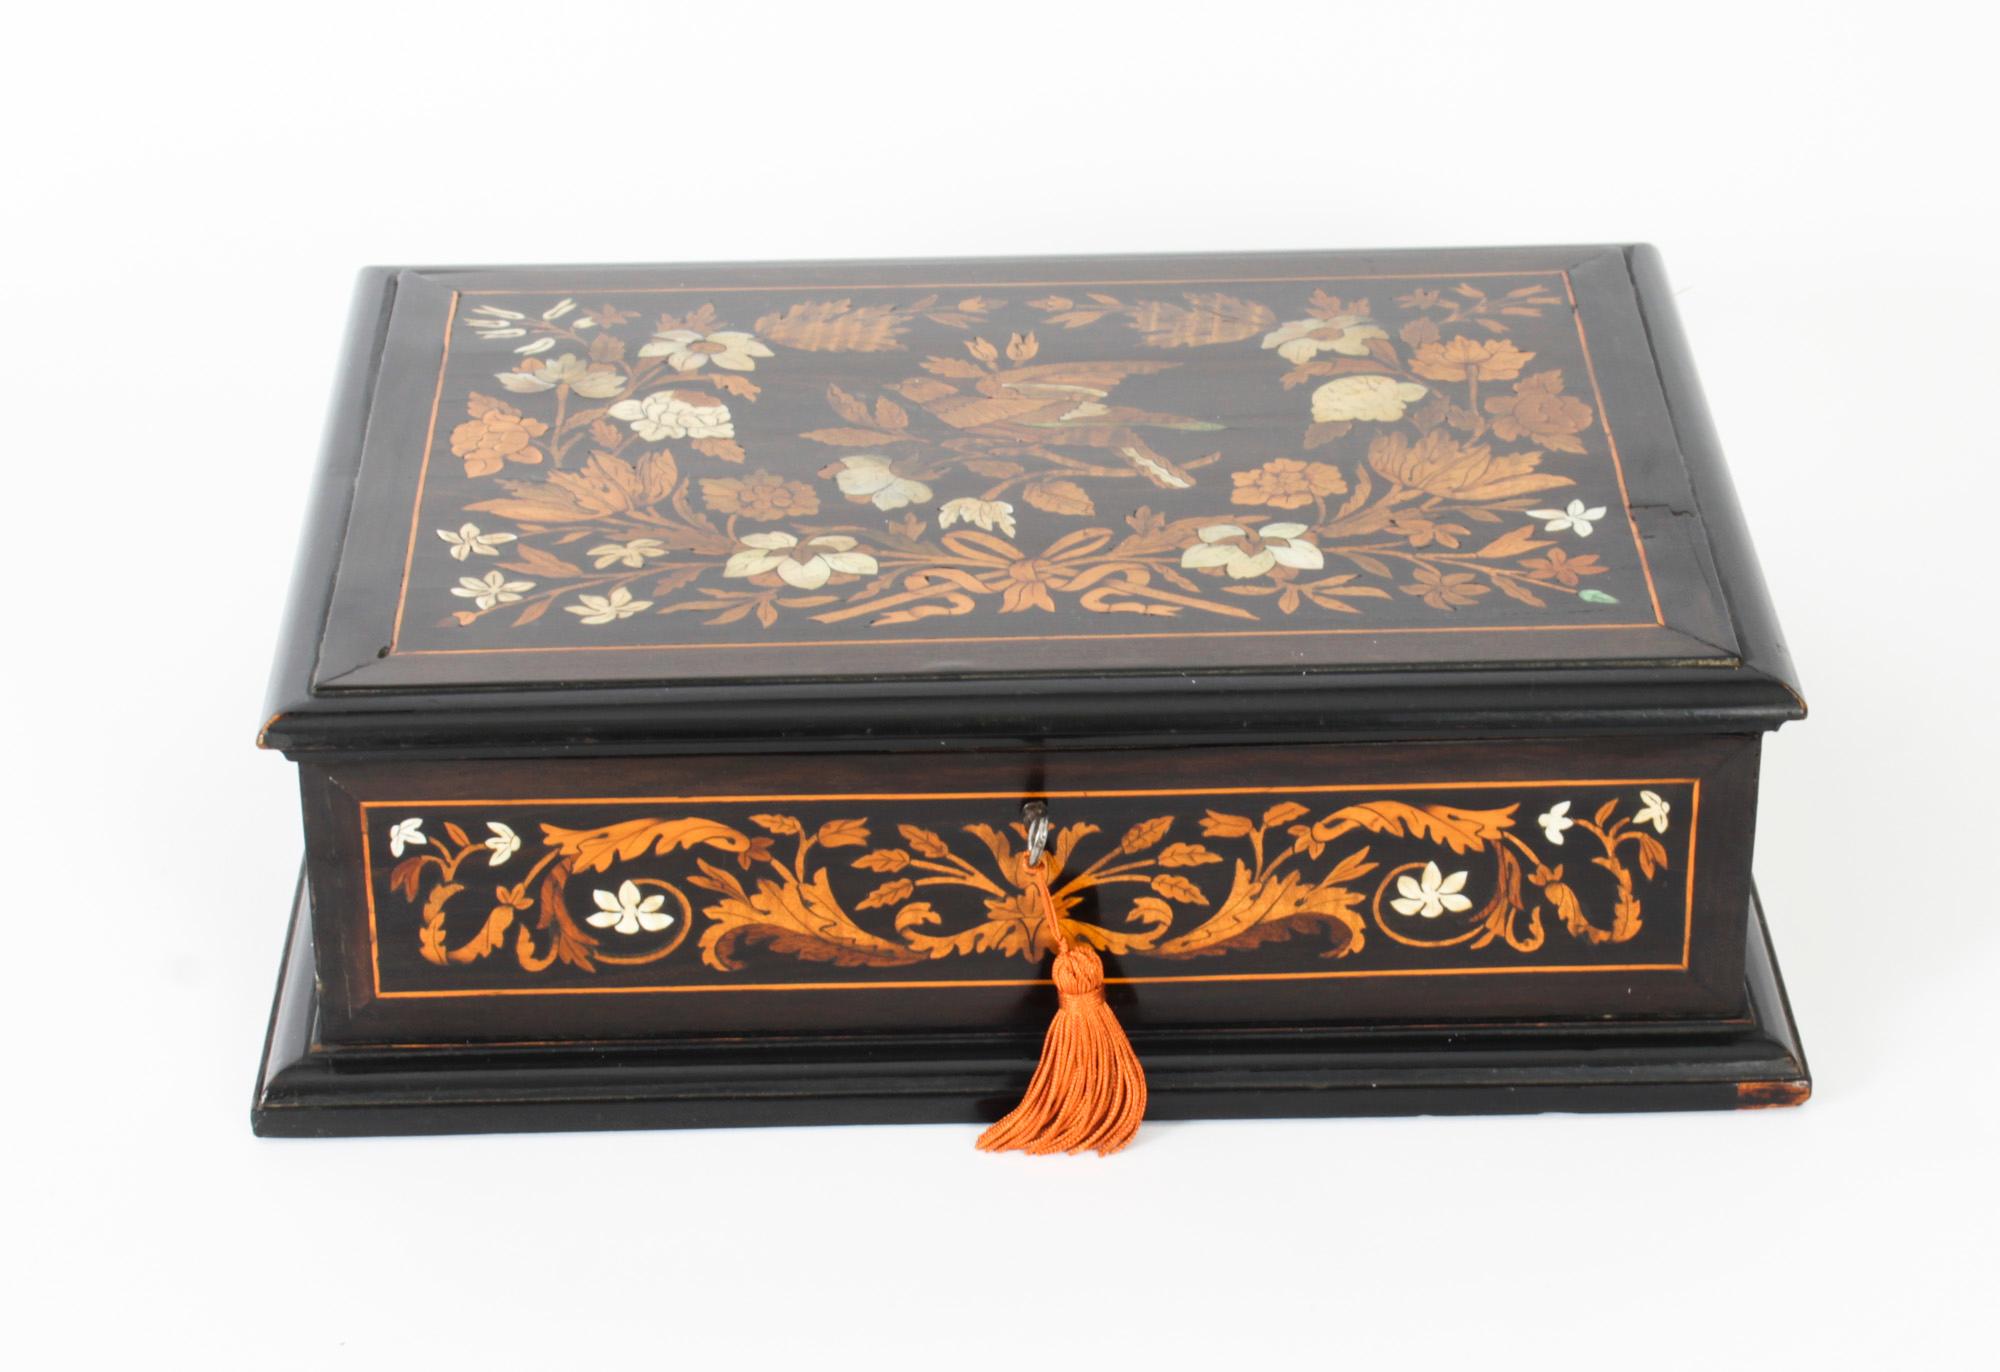 This is a beautiful antique Dutch marquetry inlaid jewellery casket, C1870 in date.

The rectangular ebonized casket has a hinged top and sides which is decorated with floral garlands, wreaths and a song bird, it opens to reveal a light blue silk